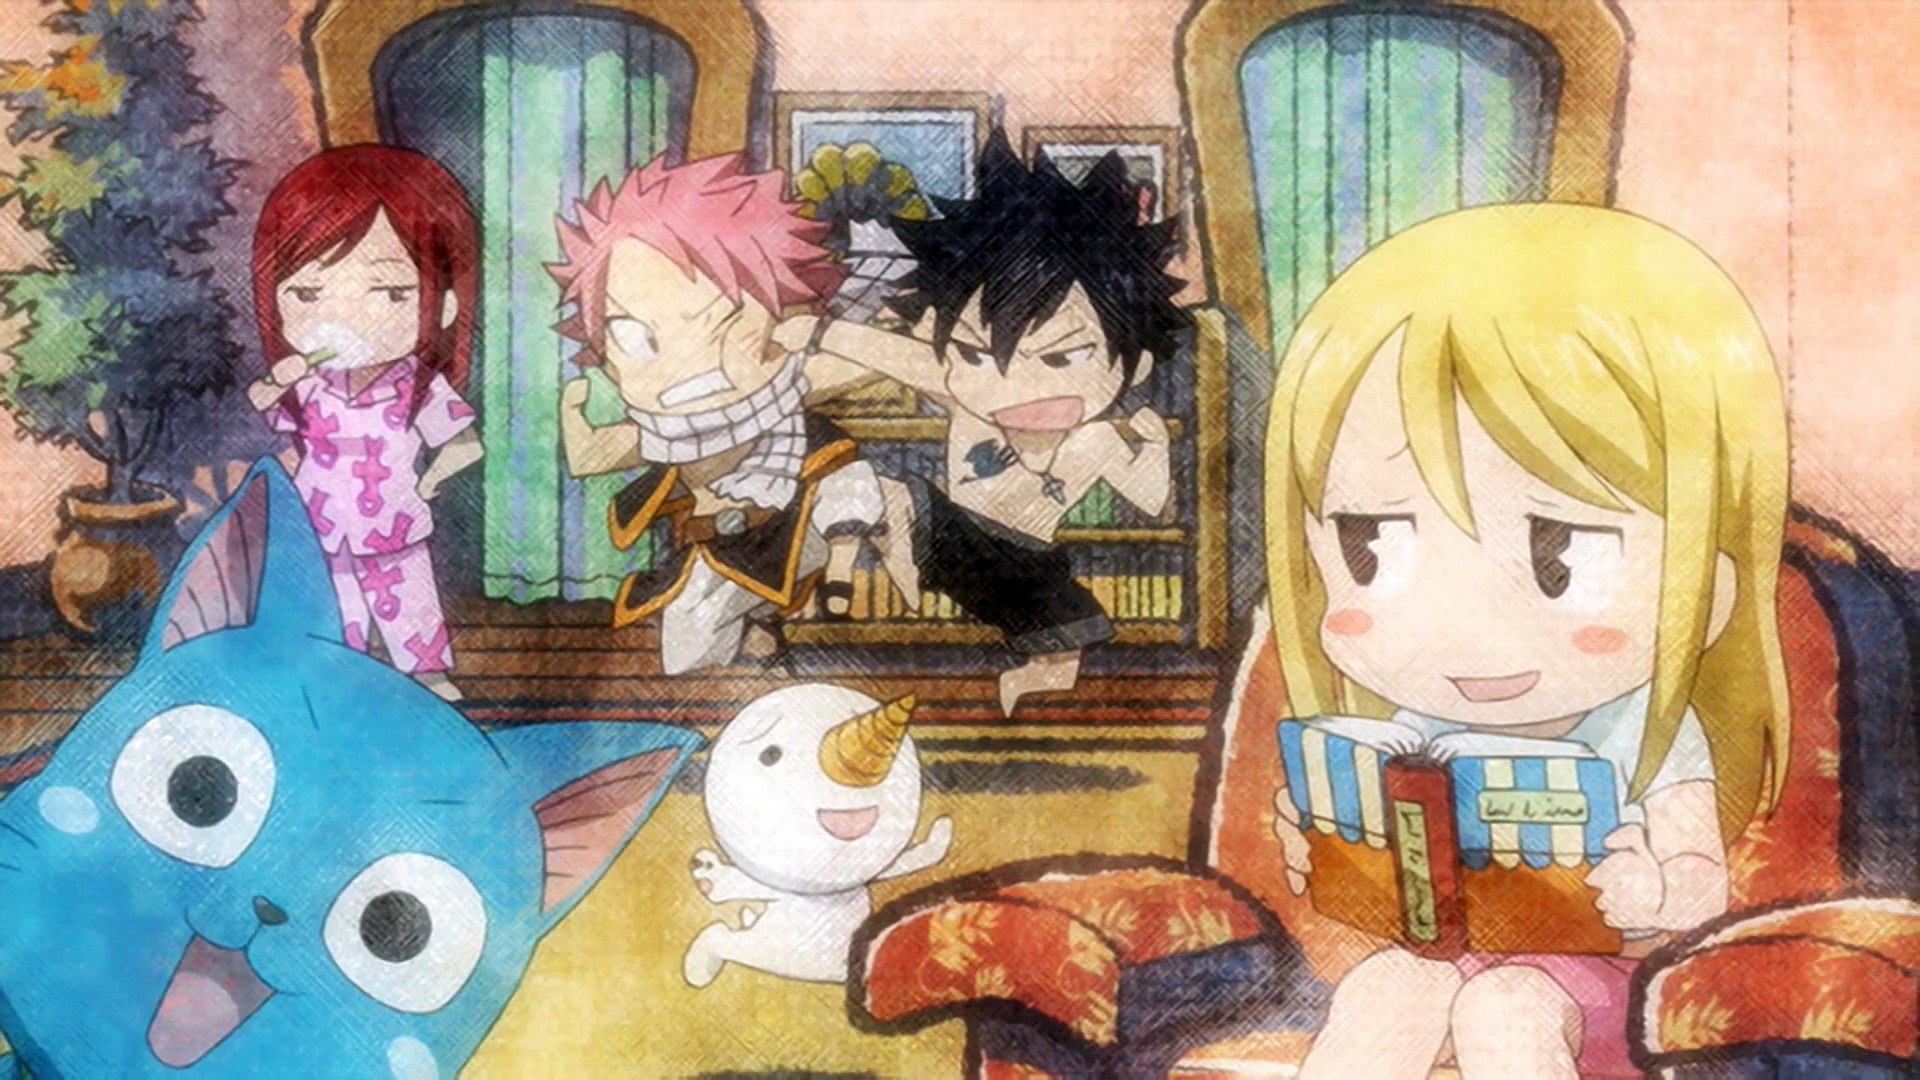 Nt Fairy Tail Ending 2 Nc Video Dailymotion